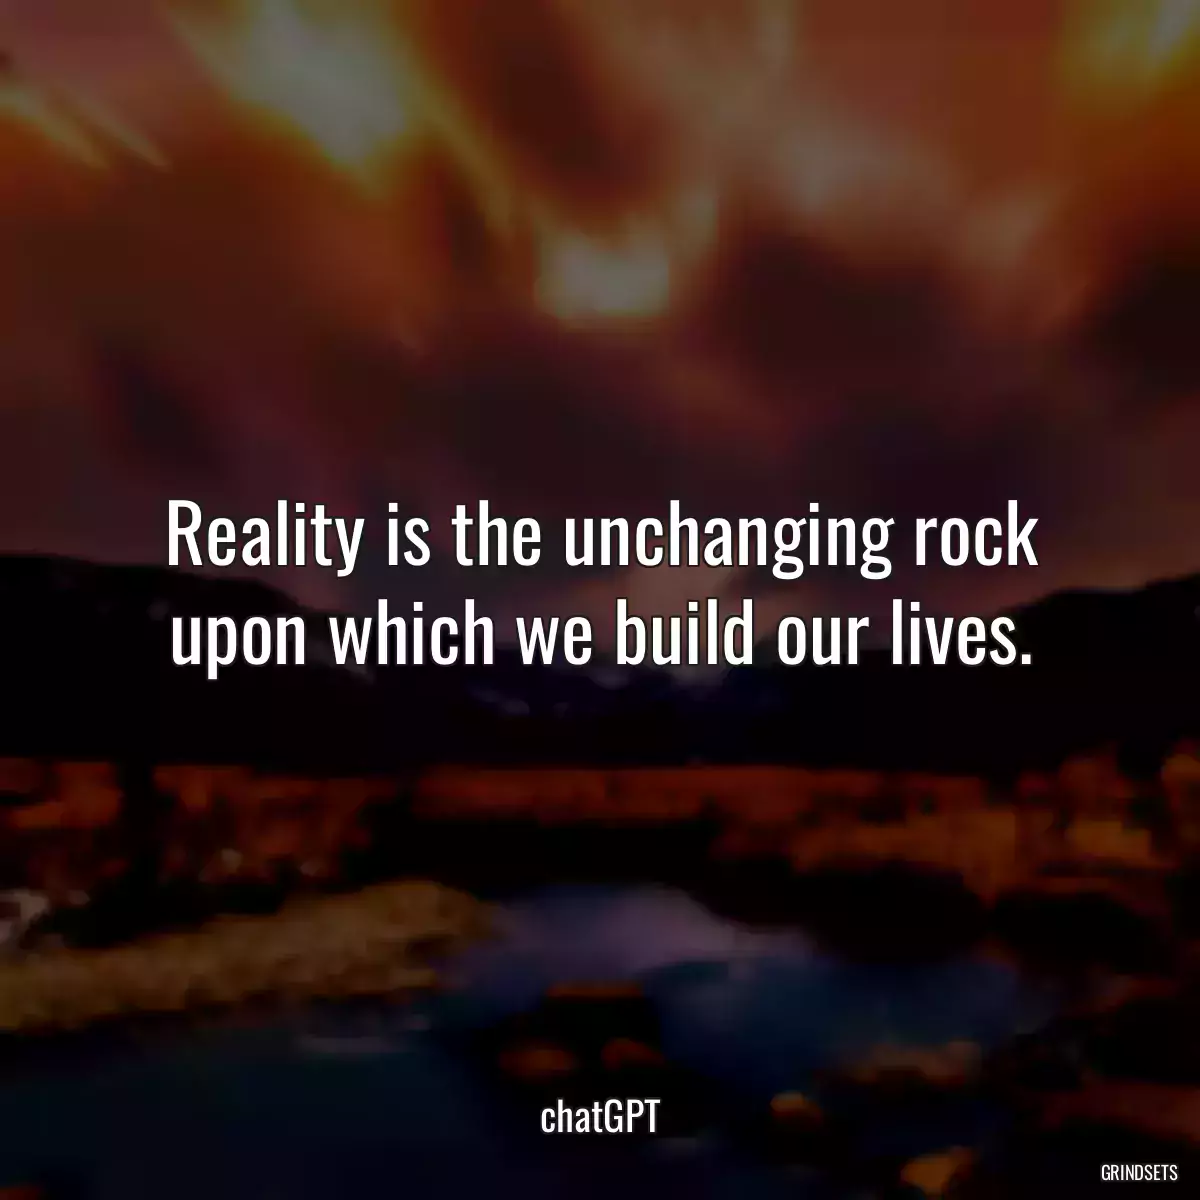 Reality is the unchanging rock upon which we build our lives.